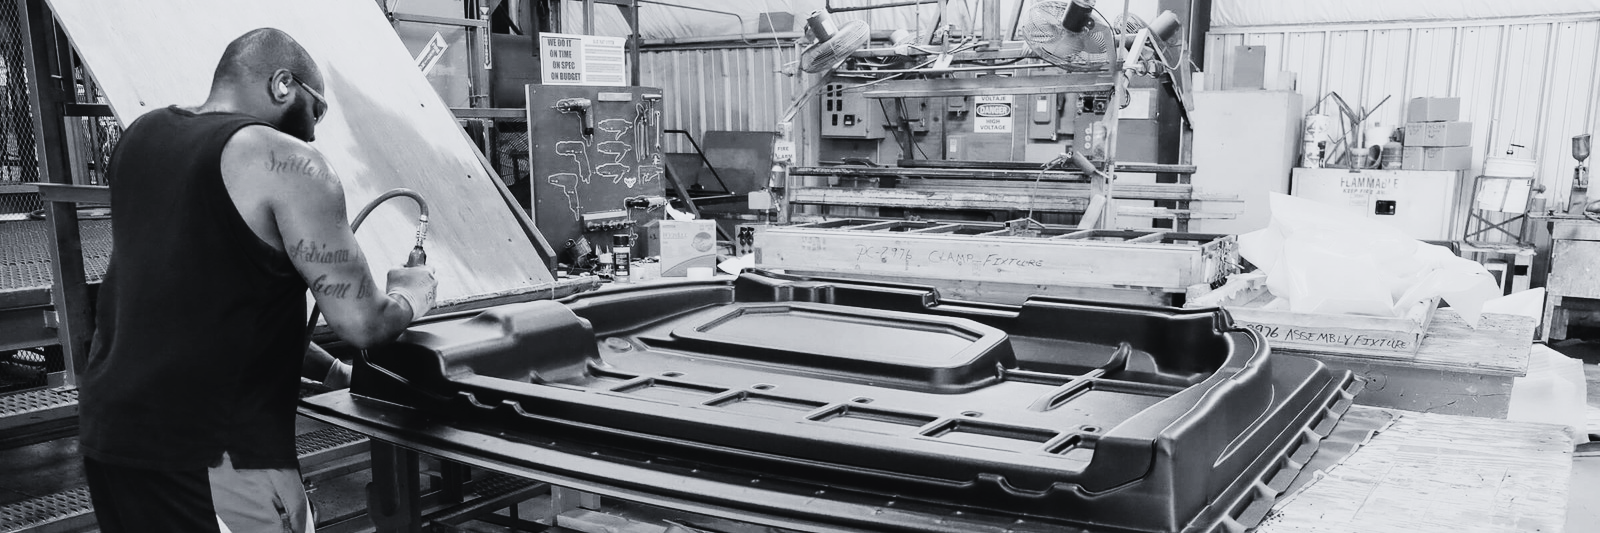 How Thermoforming Large Parts vs. Individually Made Parts Saves Weight, Time, and Money